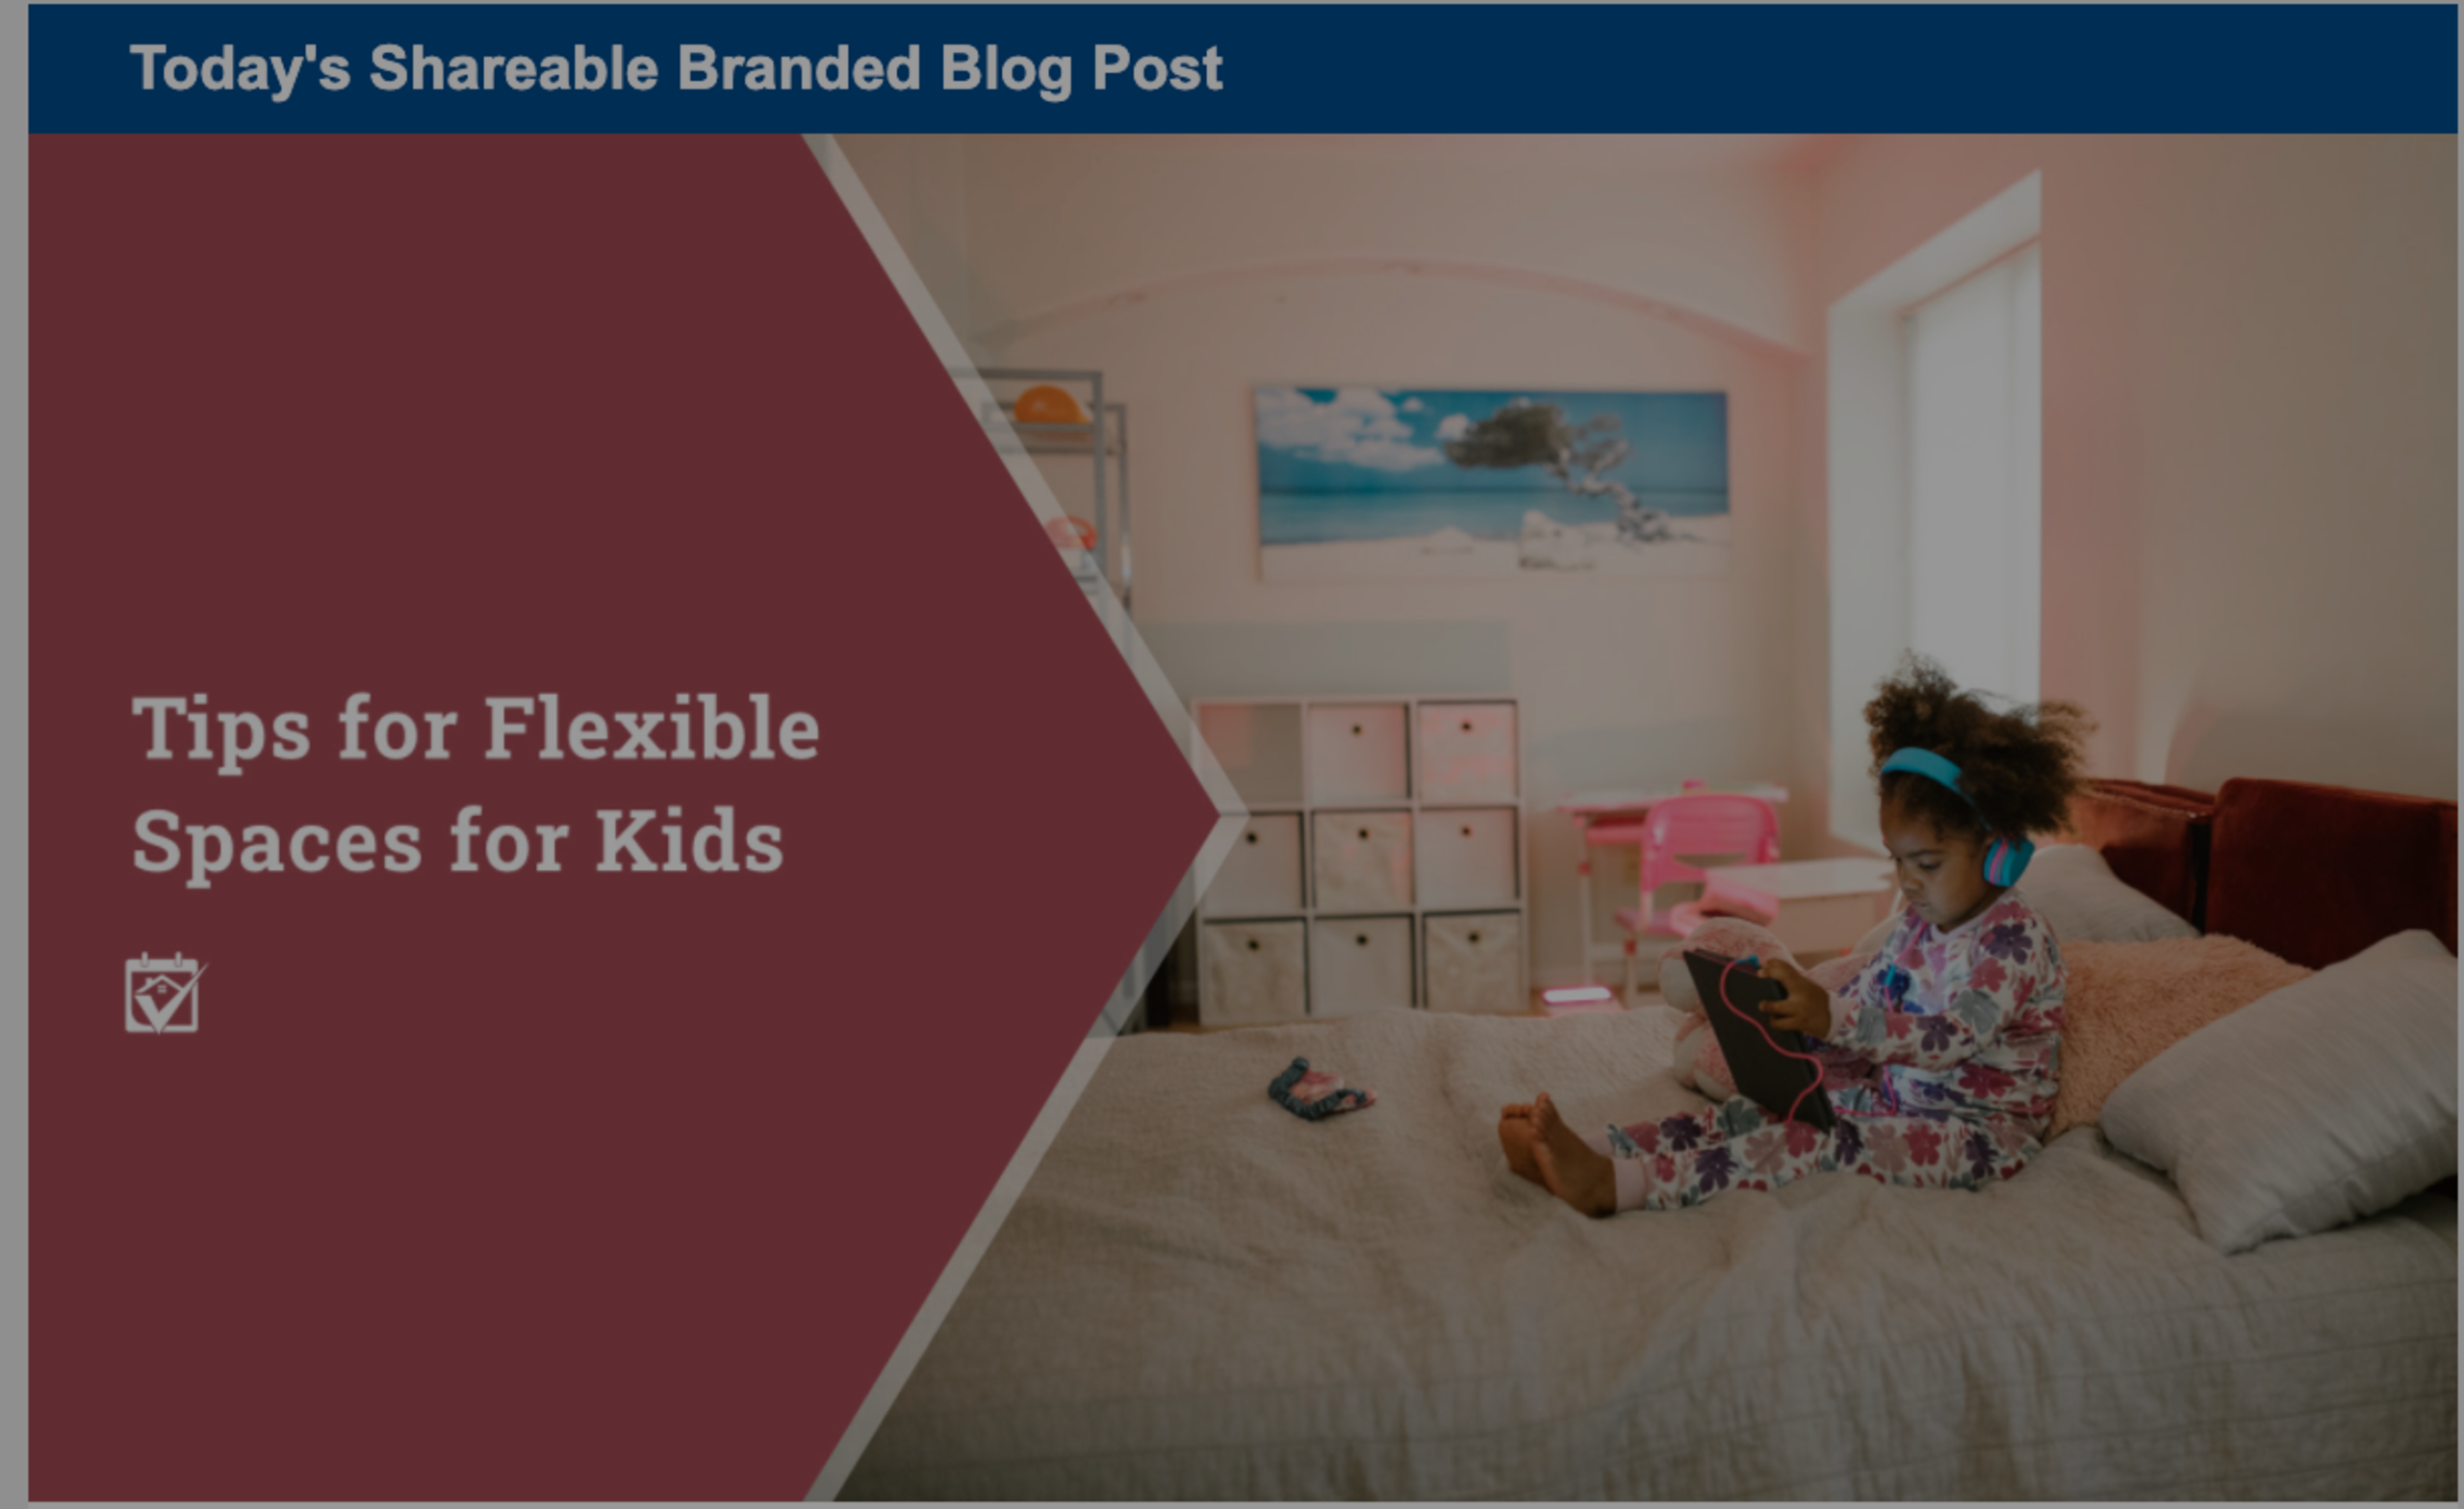 Tips for Flexible Spaces for Kids